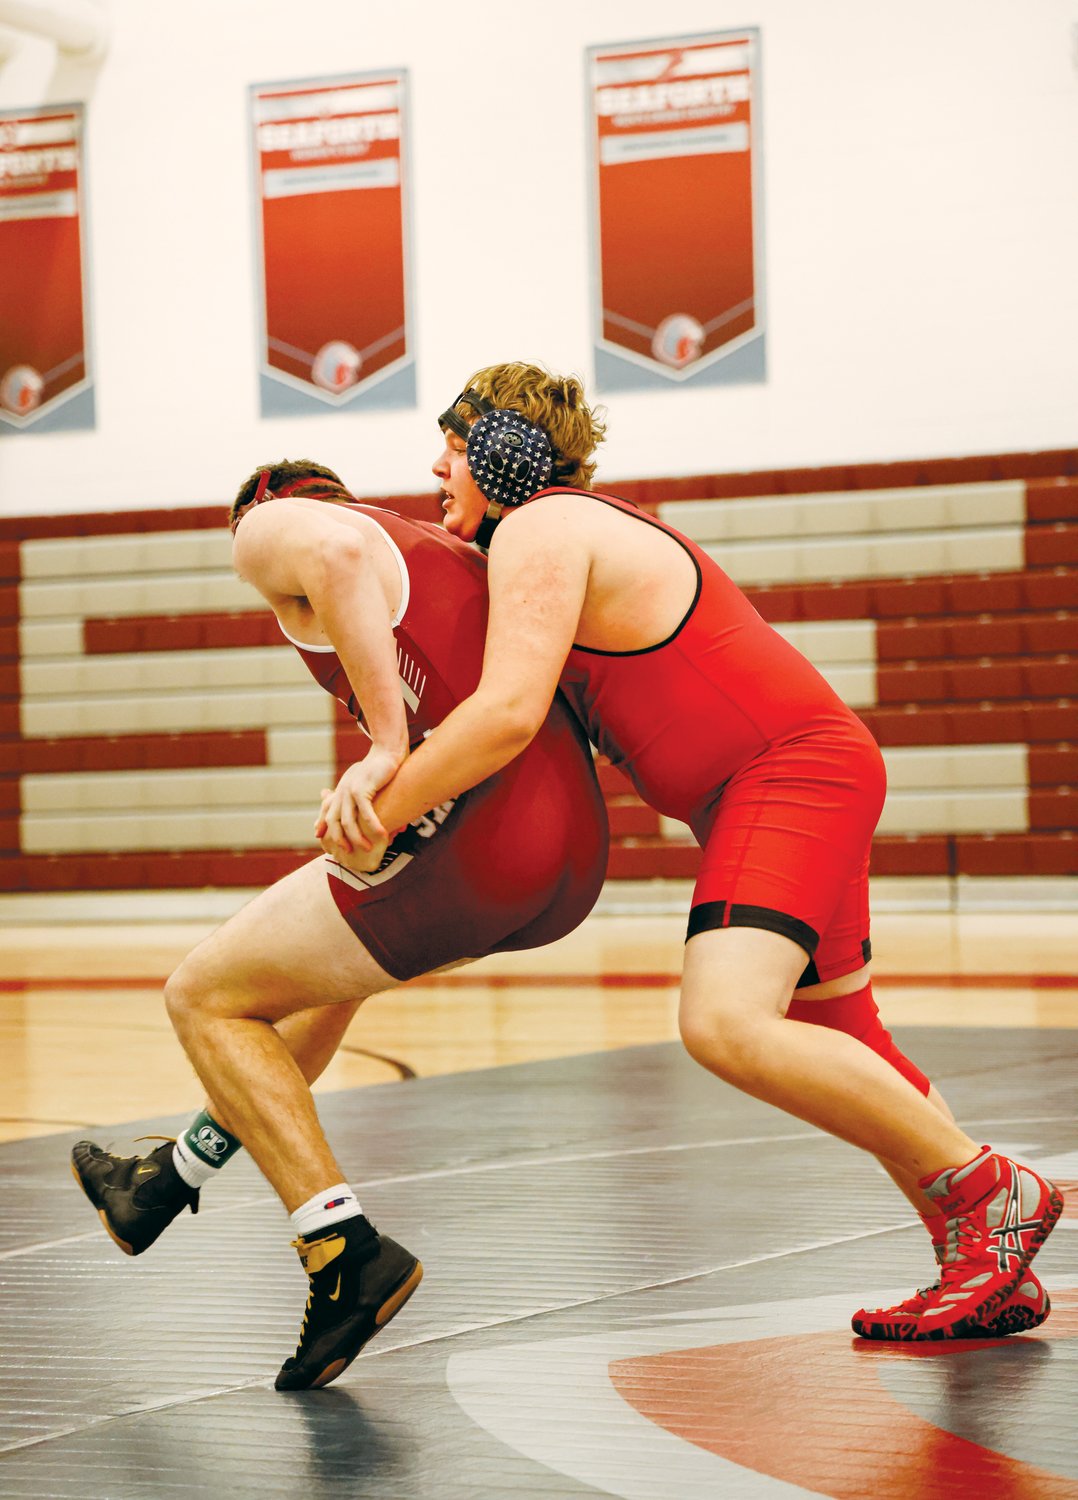 Seaforth's Cole Ballard (left) works to complete a stand-up escape as Chatham Central's Steven Stilhan attempts to maintain control from behind in their 195-pound match last Friday. The Hawks defeated the Bears in their dual-team match, 54-24.